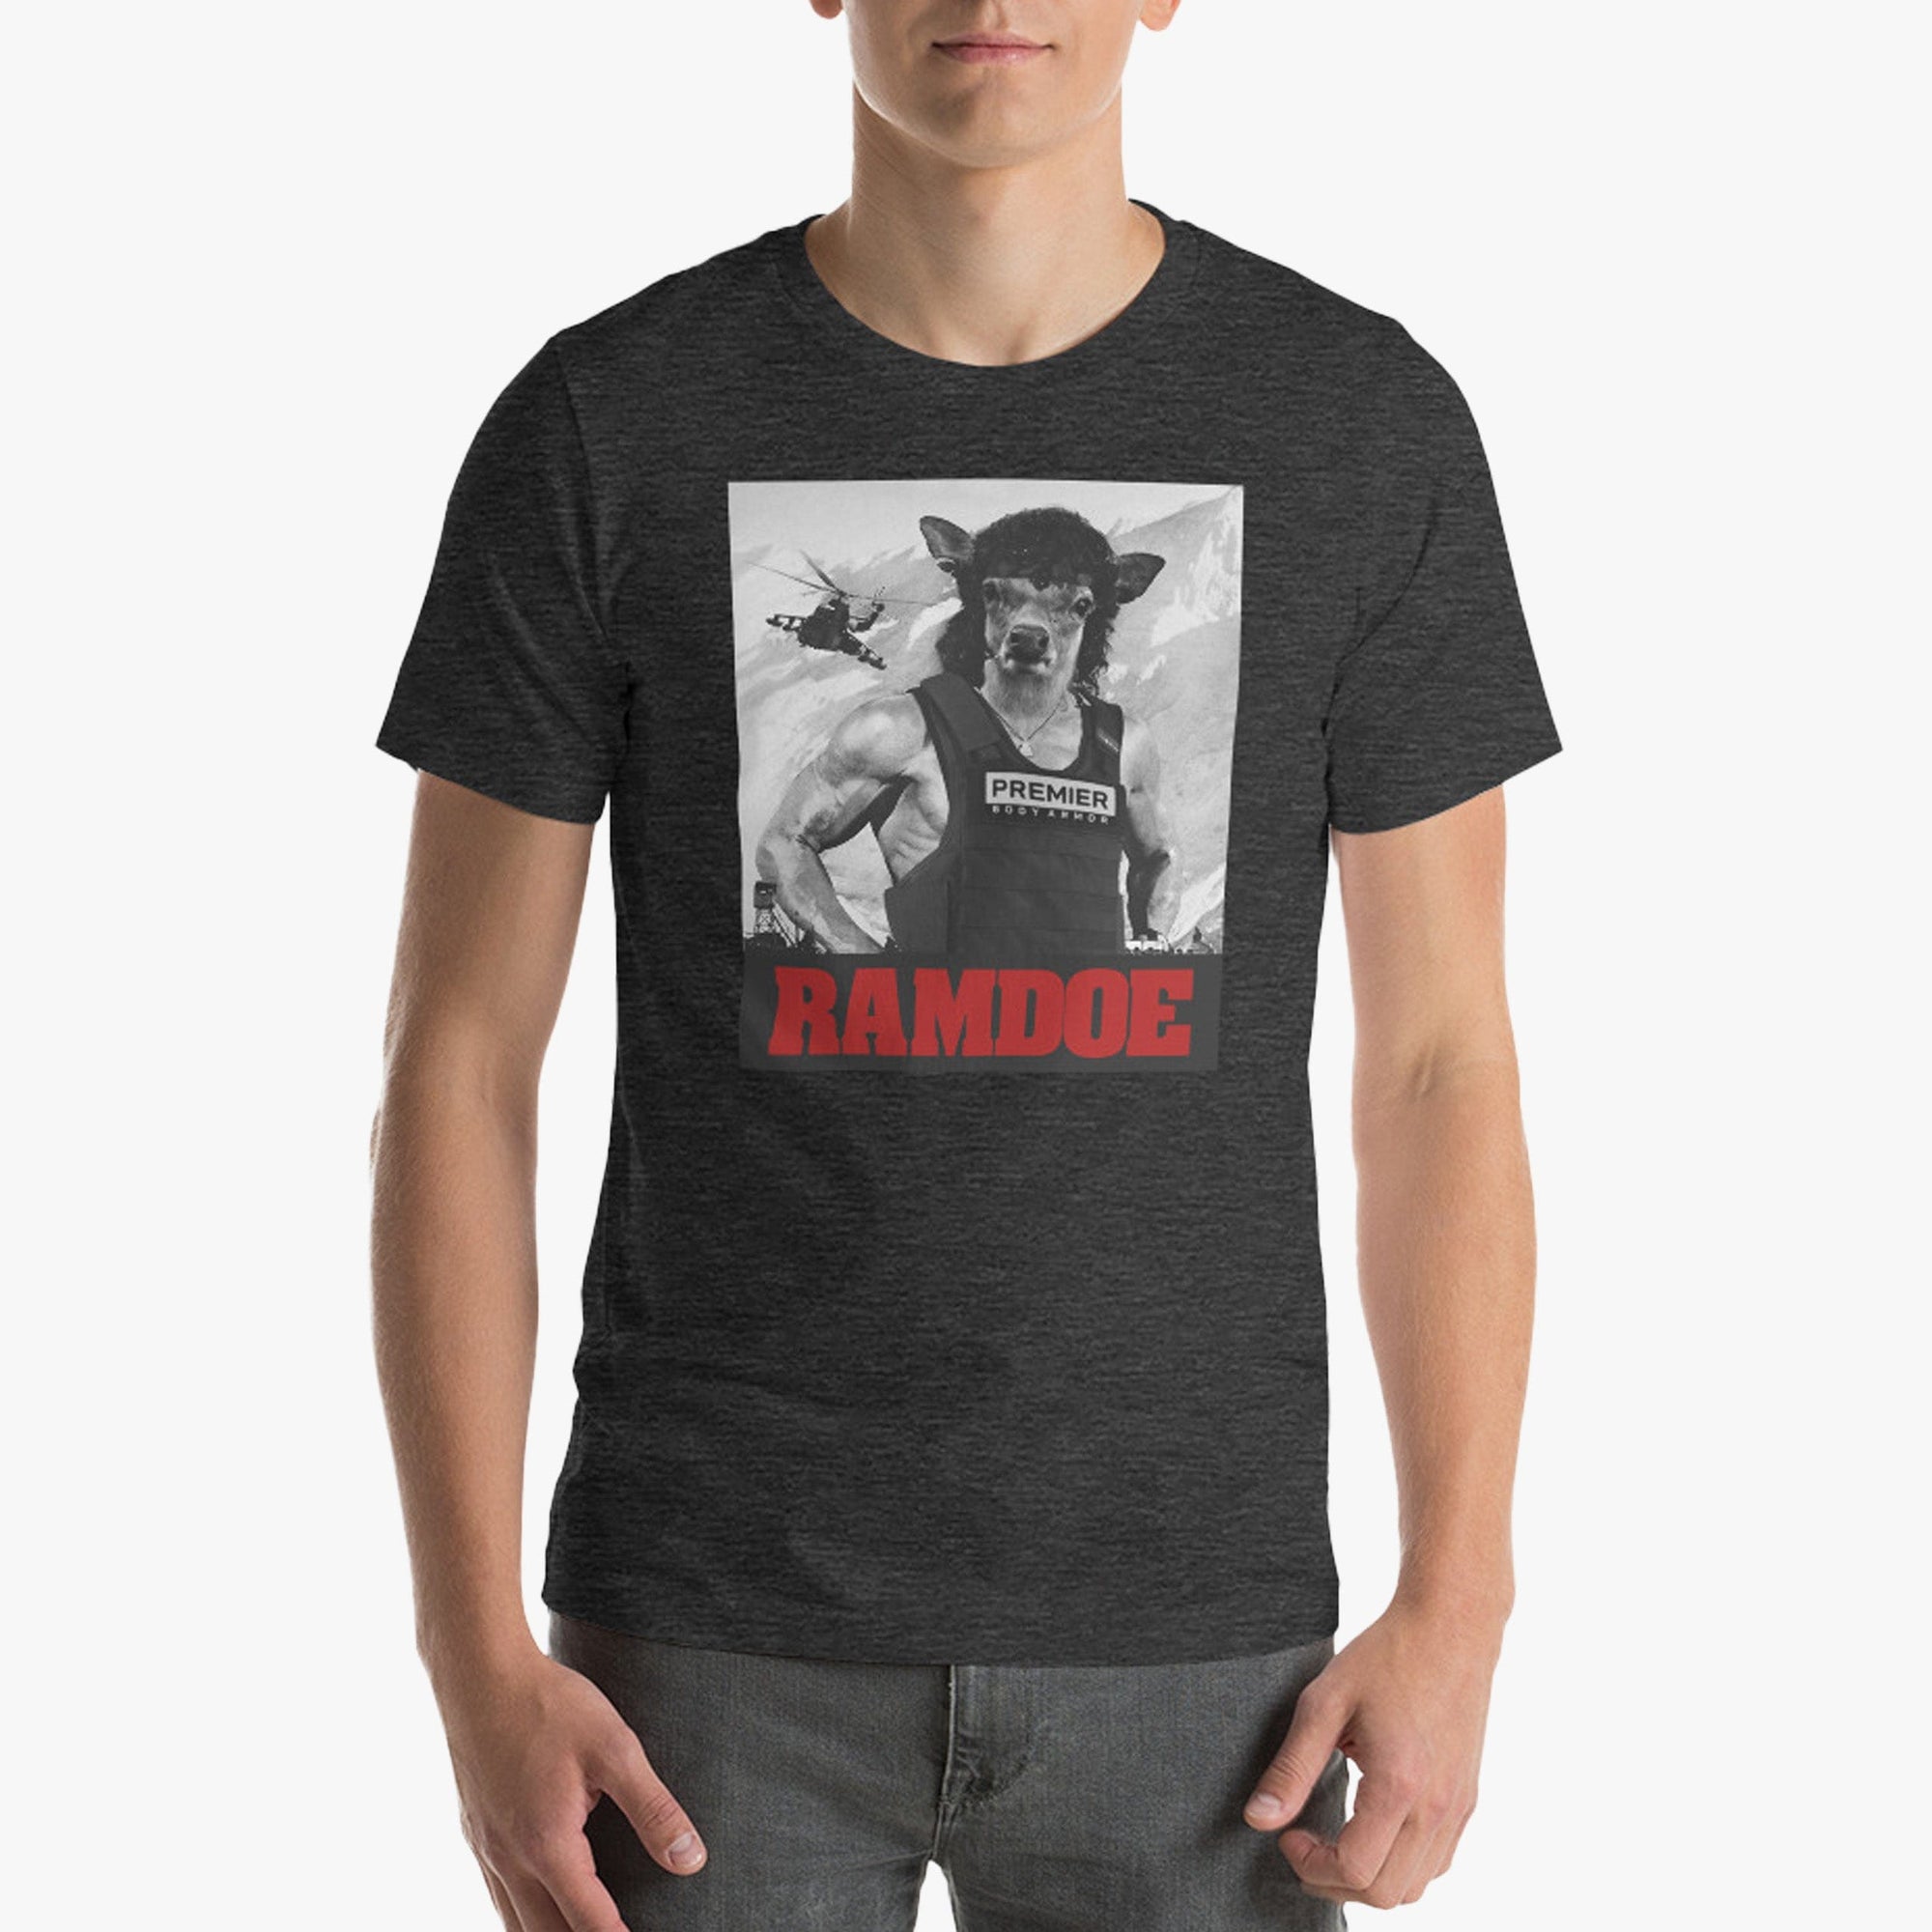 Buy your limited edition Ramdoe T-Shirt today! This shirt is inspired by kevlar vests for deer and Rambo. Super lightweight t-shirt that will make you feel bulletproof!